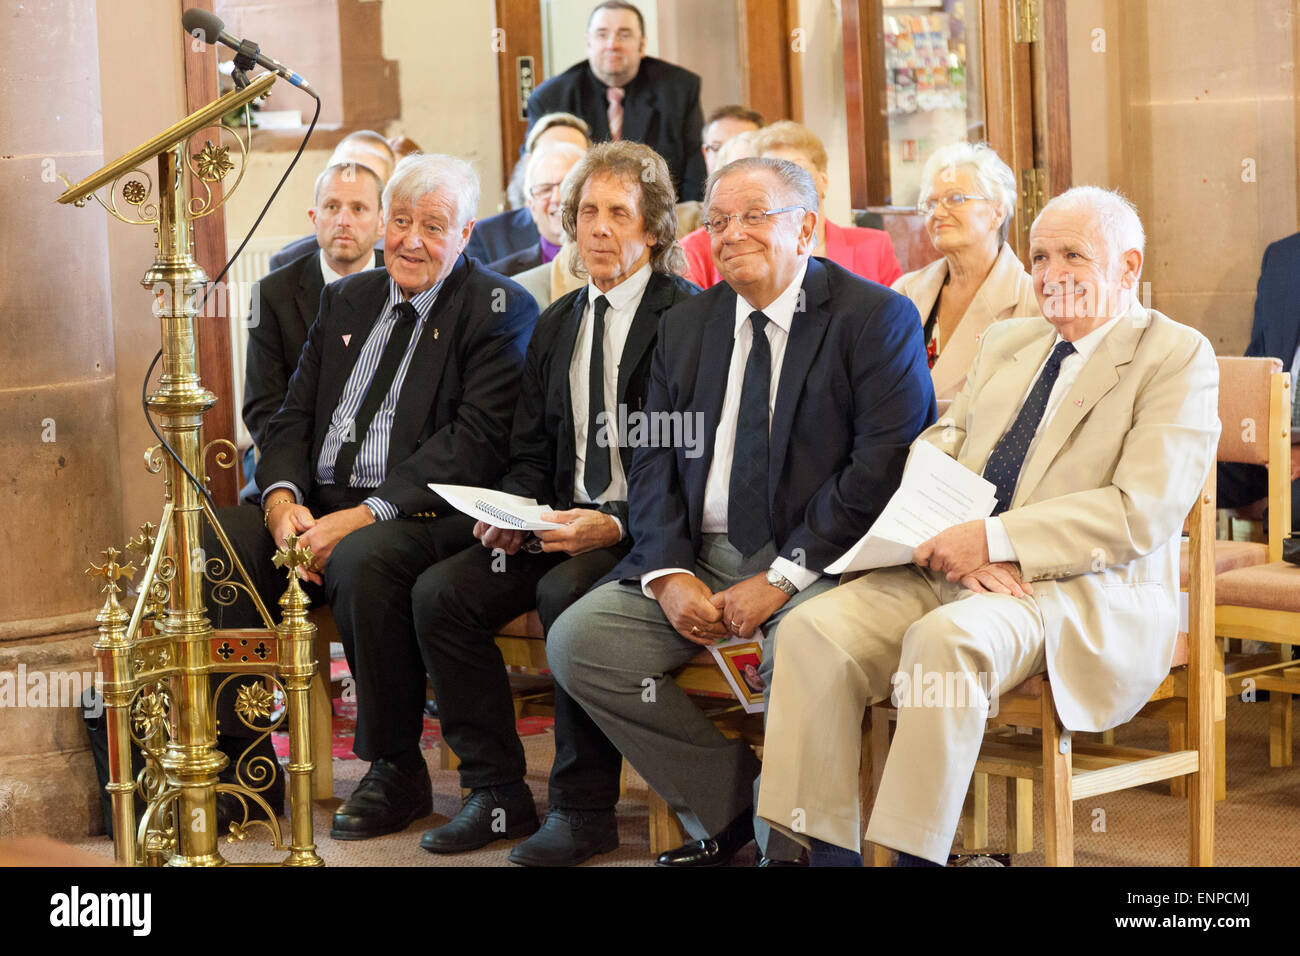 Holy Trinity Church, Chesterton, UK. 8 May 2015. Husband Colin Gregory, Stoke City, Everton and Aston Villa footballer Mike Pejic; Pete Conway, father of singer Robbie Williams and Douglas Brock at the Memorial Service for the life of Singer/Songwriter Jackie Trent. Credit:  John Henshall / Alamy Live News PER0548 Stock Photo